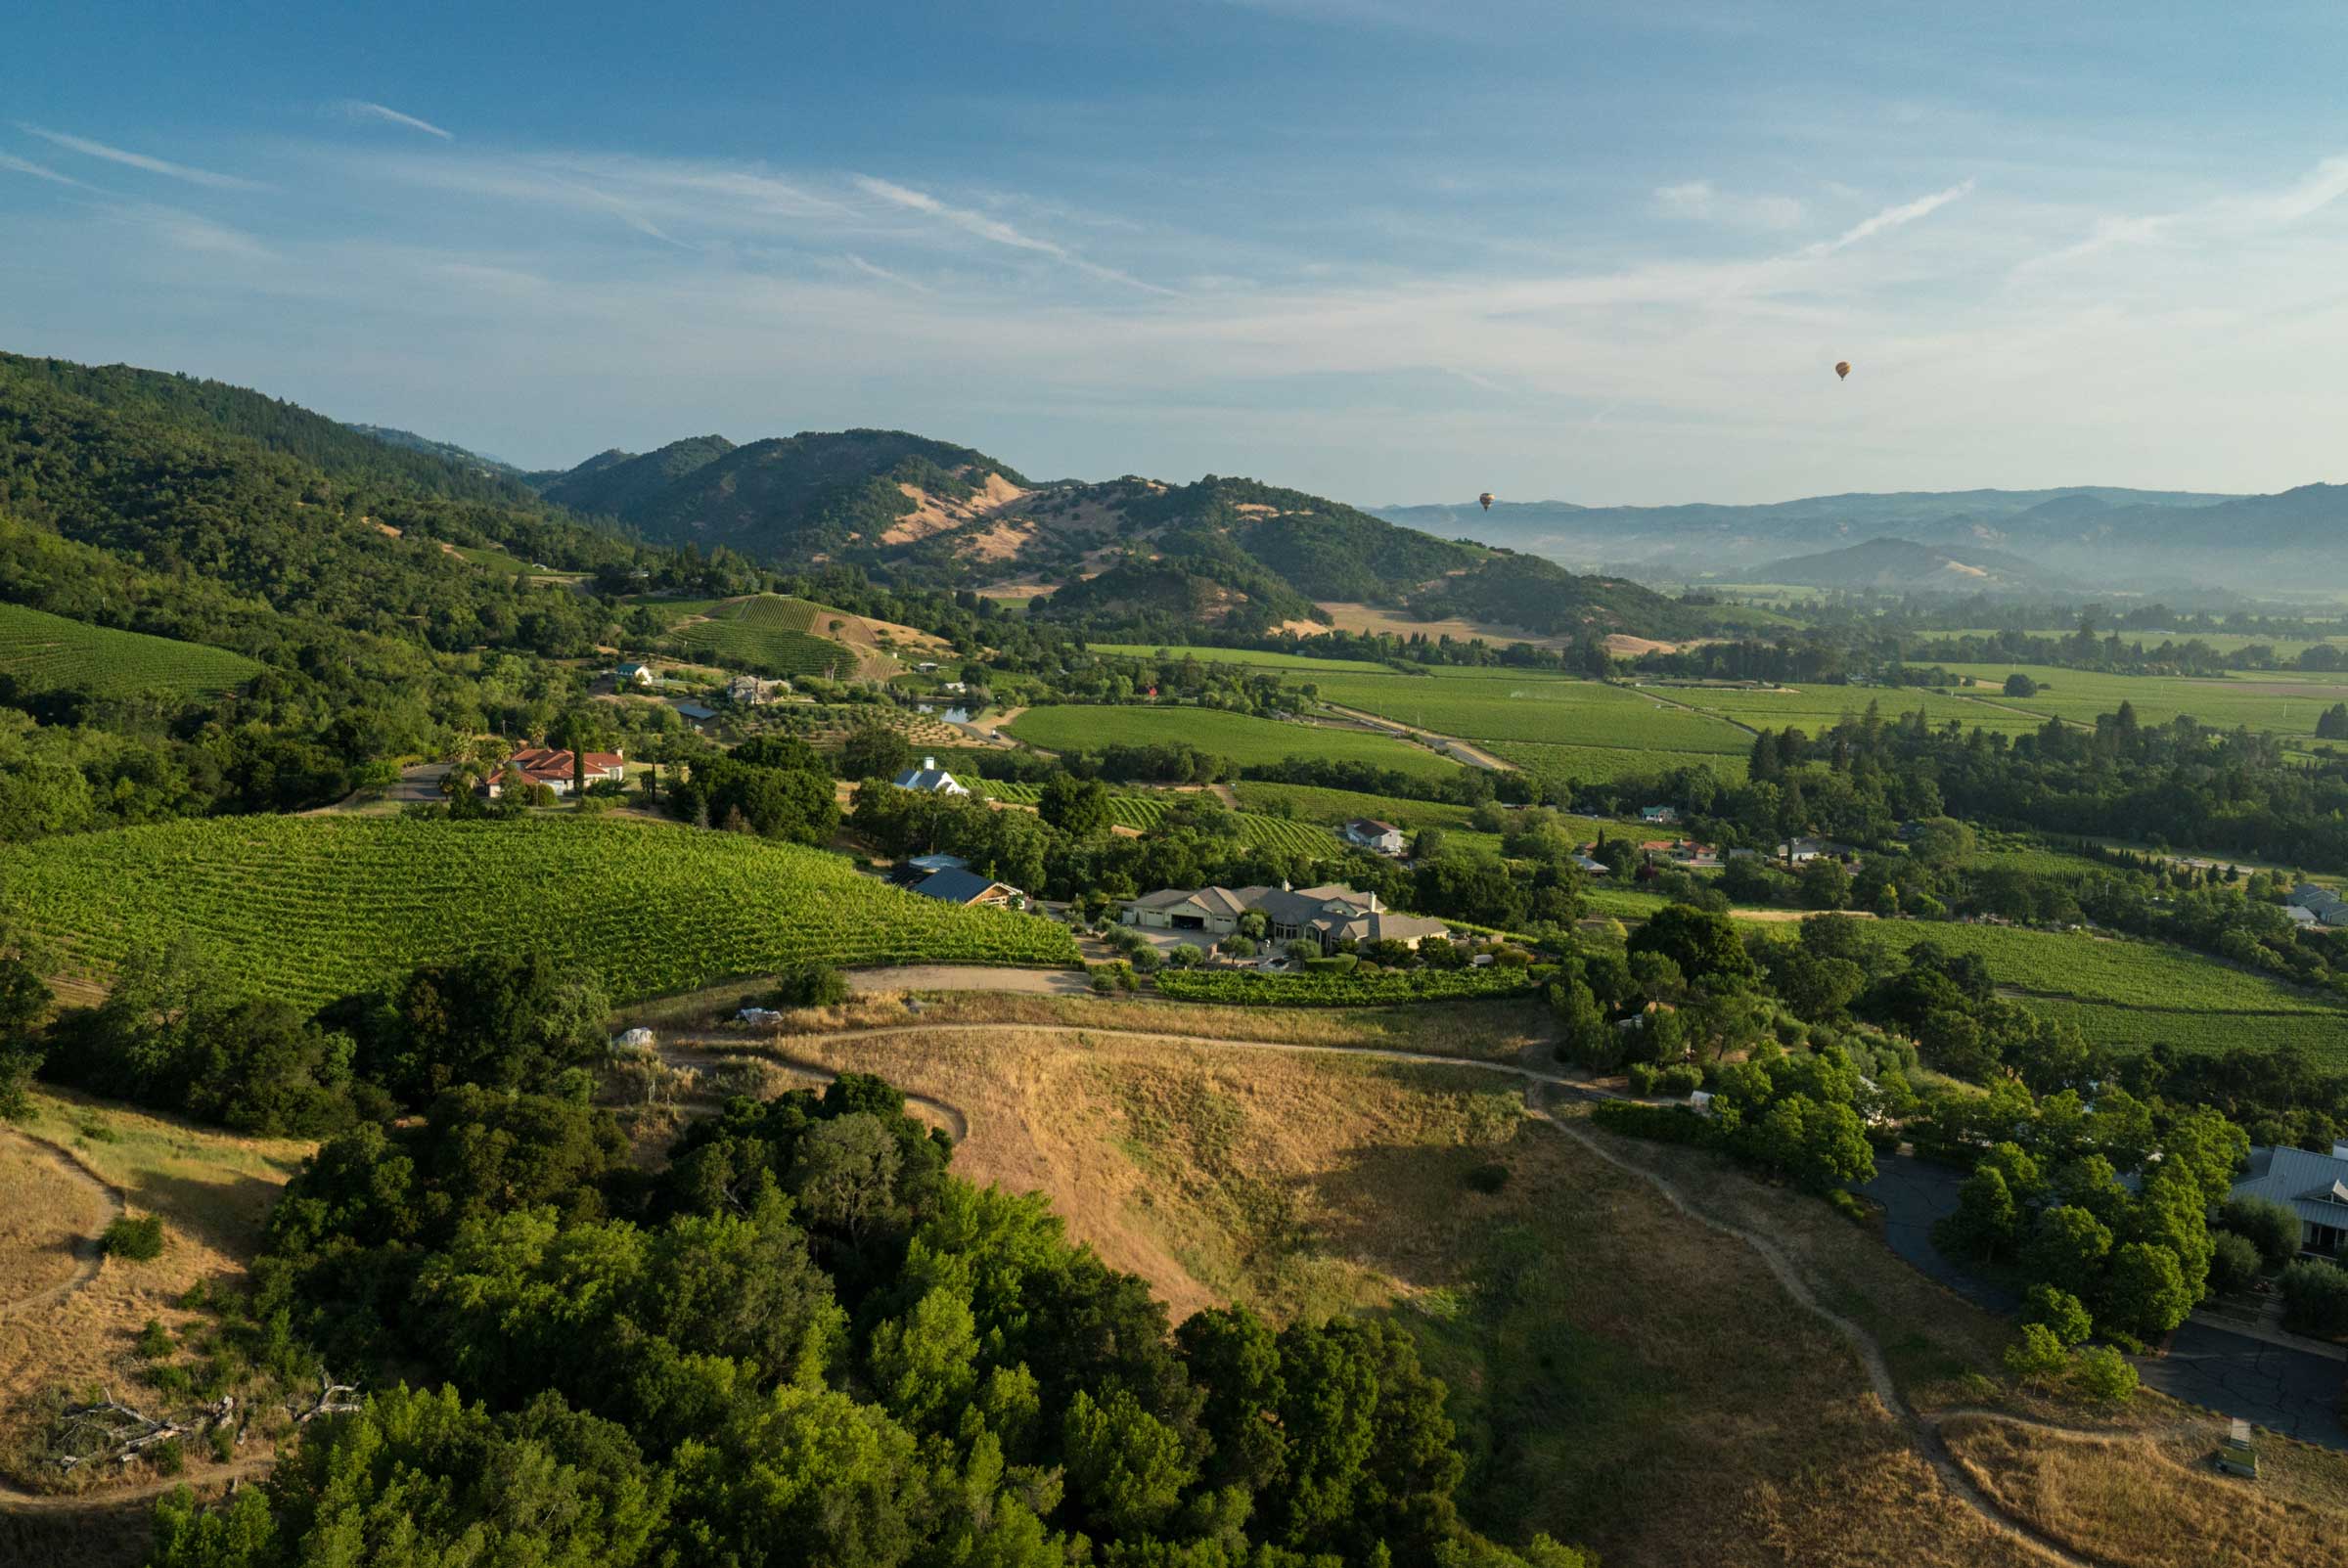 Aerial view of Napa Valley